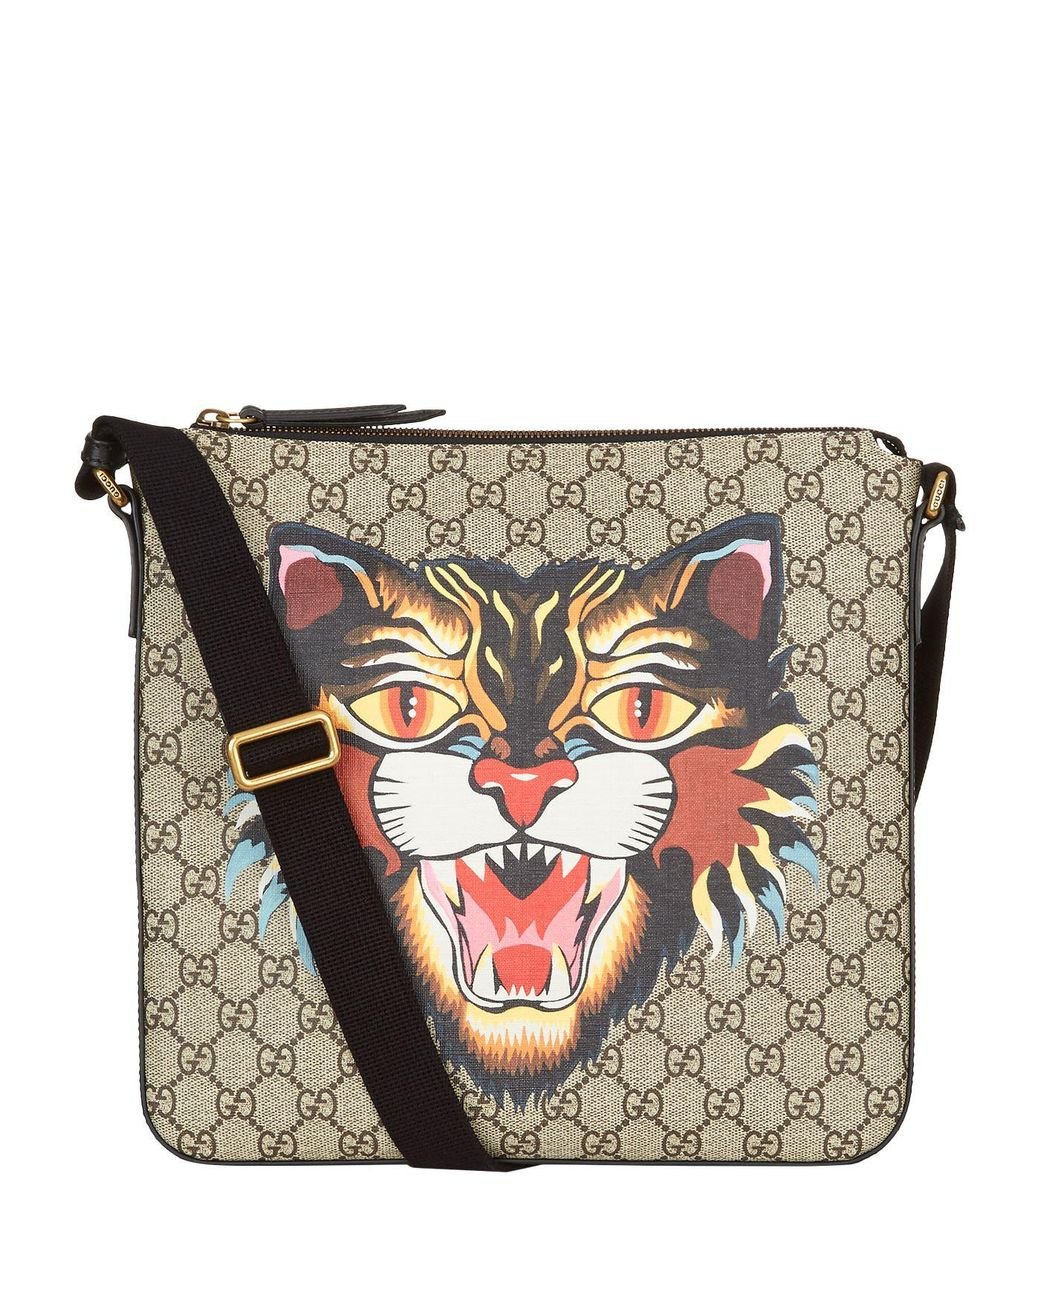 Gucci Angry Cat Supreme Messenger Bag in Natural for Men | Lyst